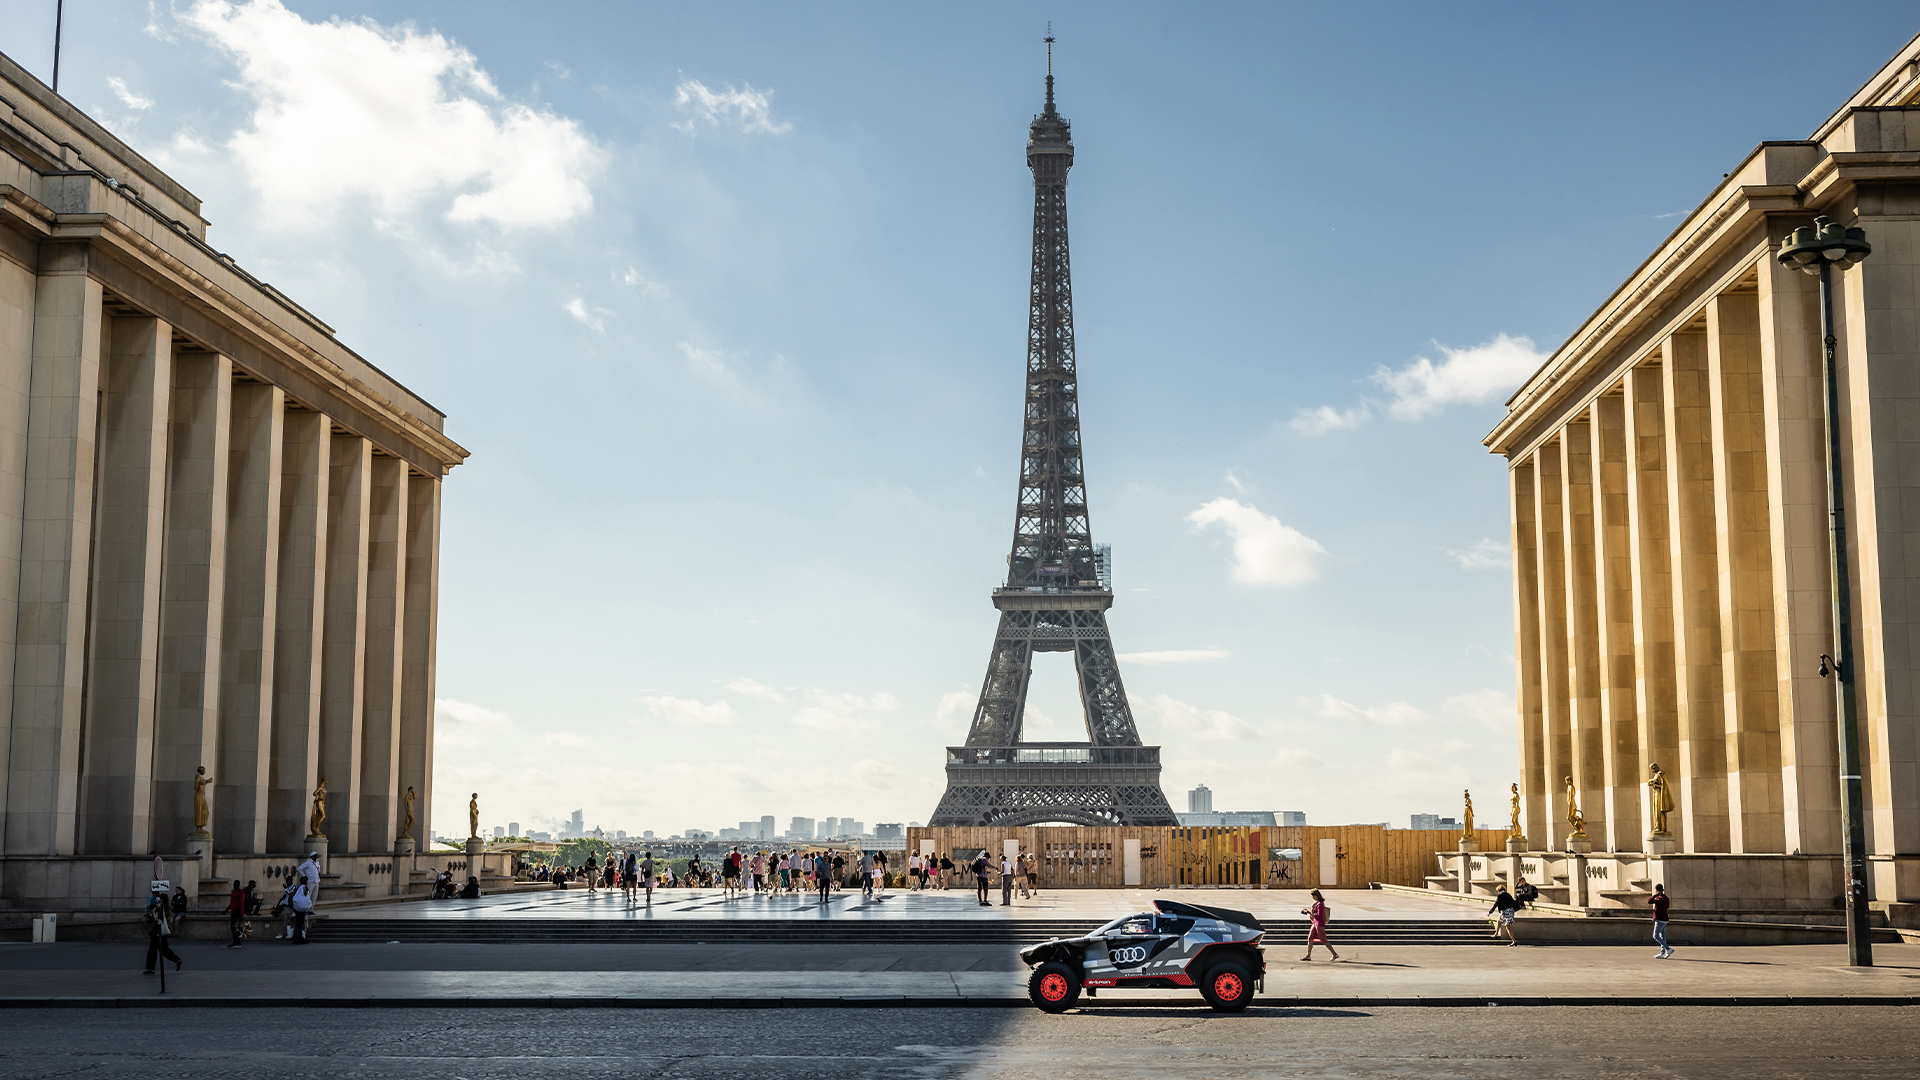 The Audi RS Q e-tron parked on a street. The Eiffel Tower can be seen in the background.